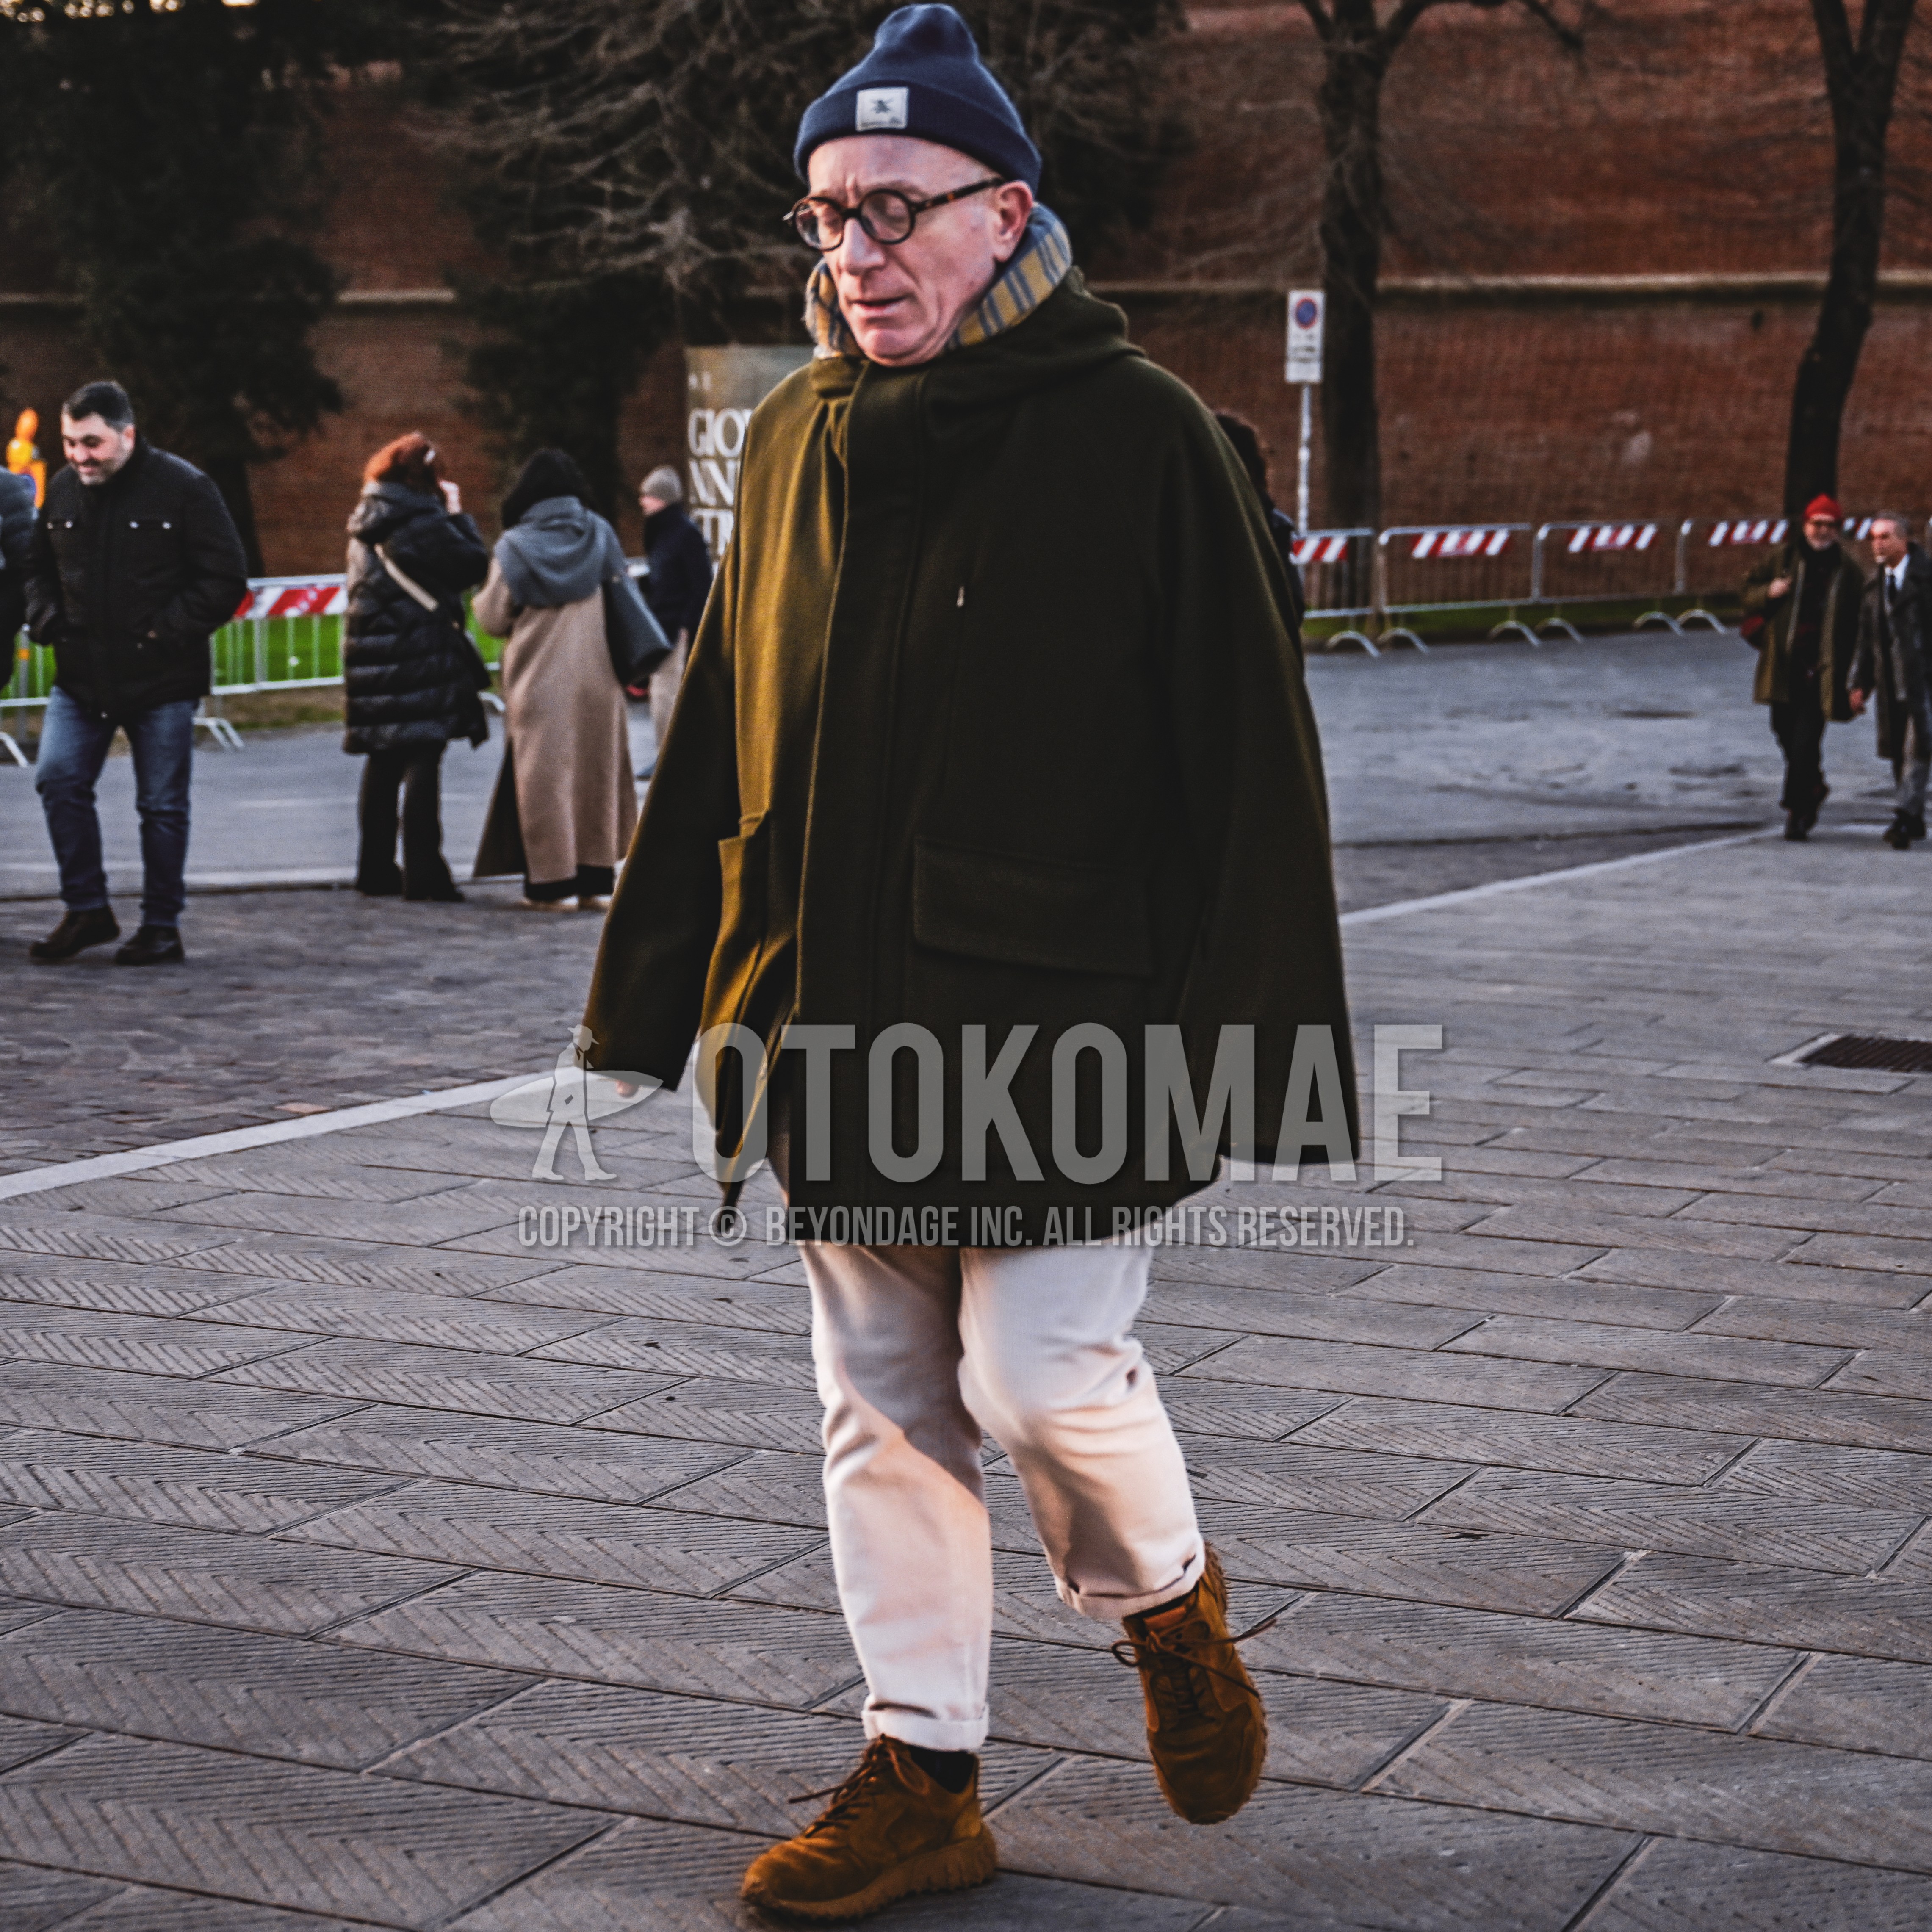 Men's autumn winter outfit with dark gray one point knit cap, brown tortoiseshell glasses, gray yellow horizontal stripes scarf, olive green plain hooded coat, beige plain winter pants (corduroy,velour), brown low-cut sneakers.